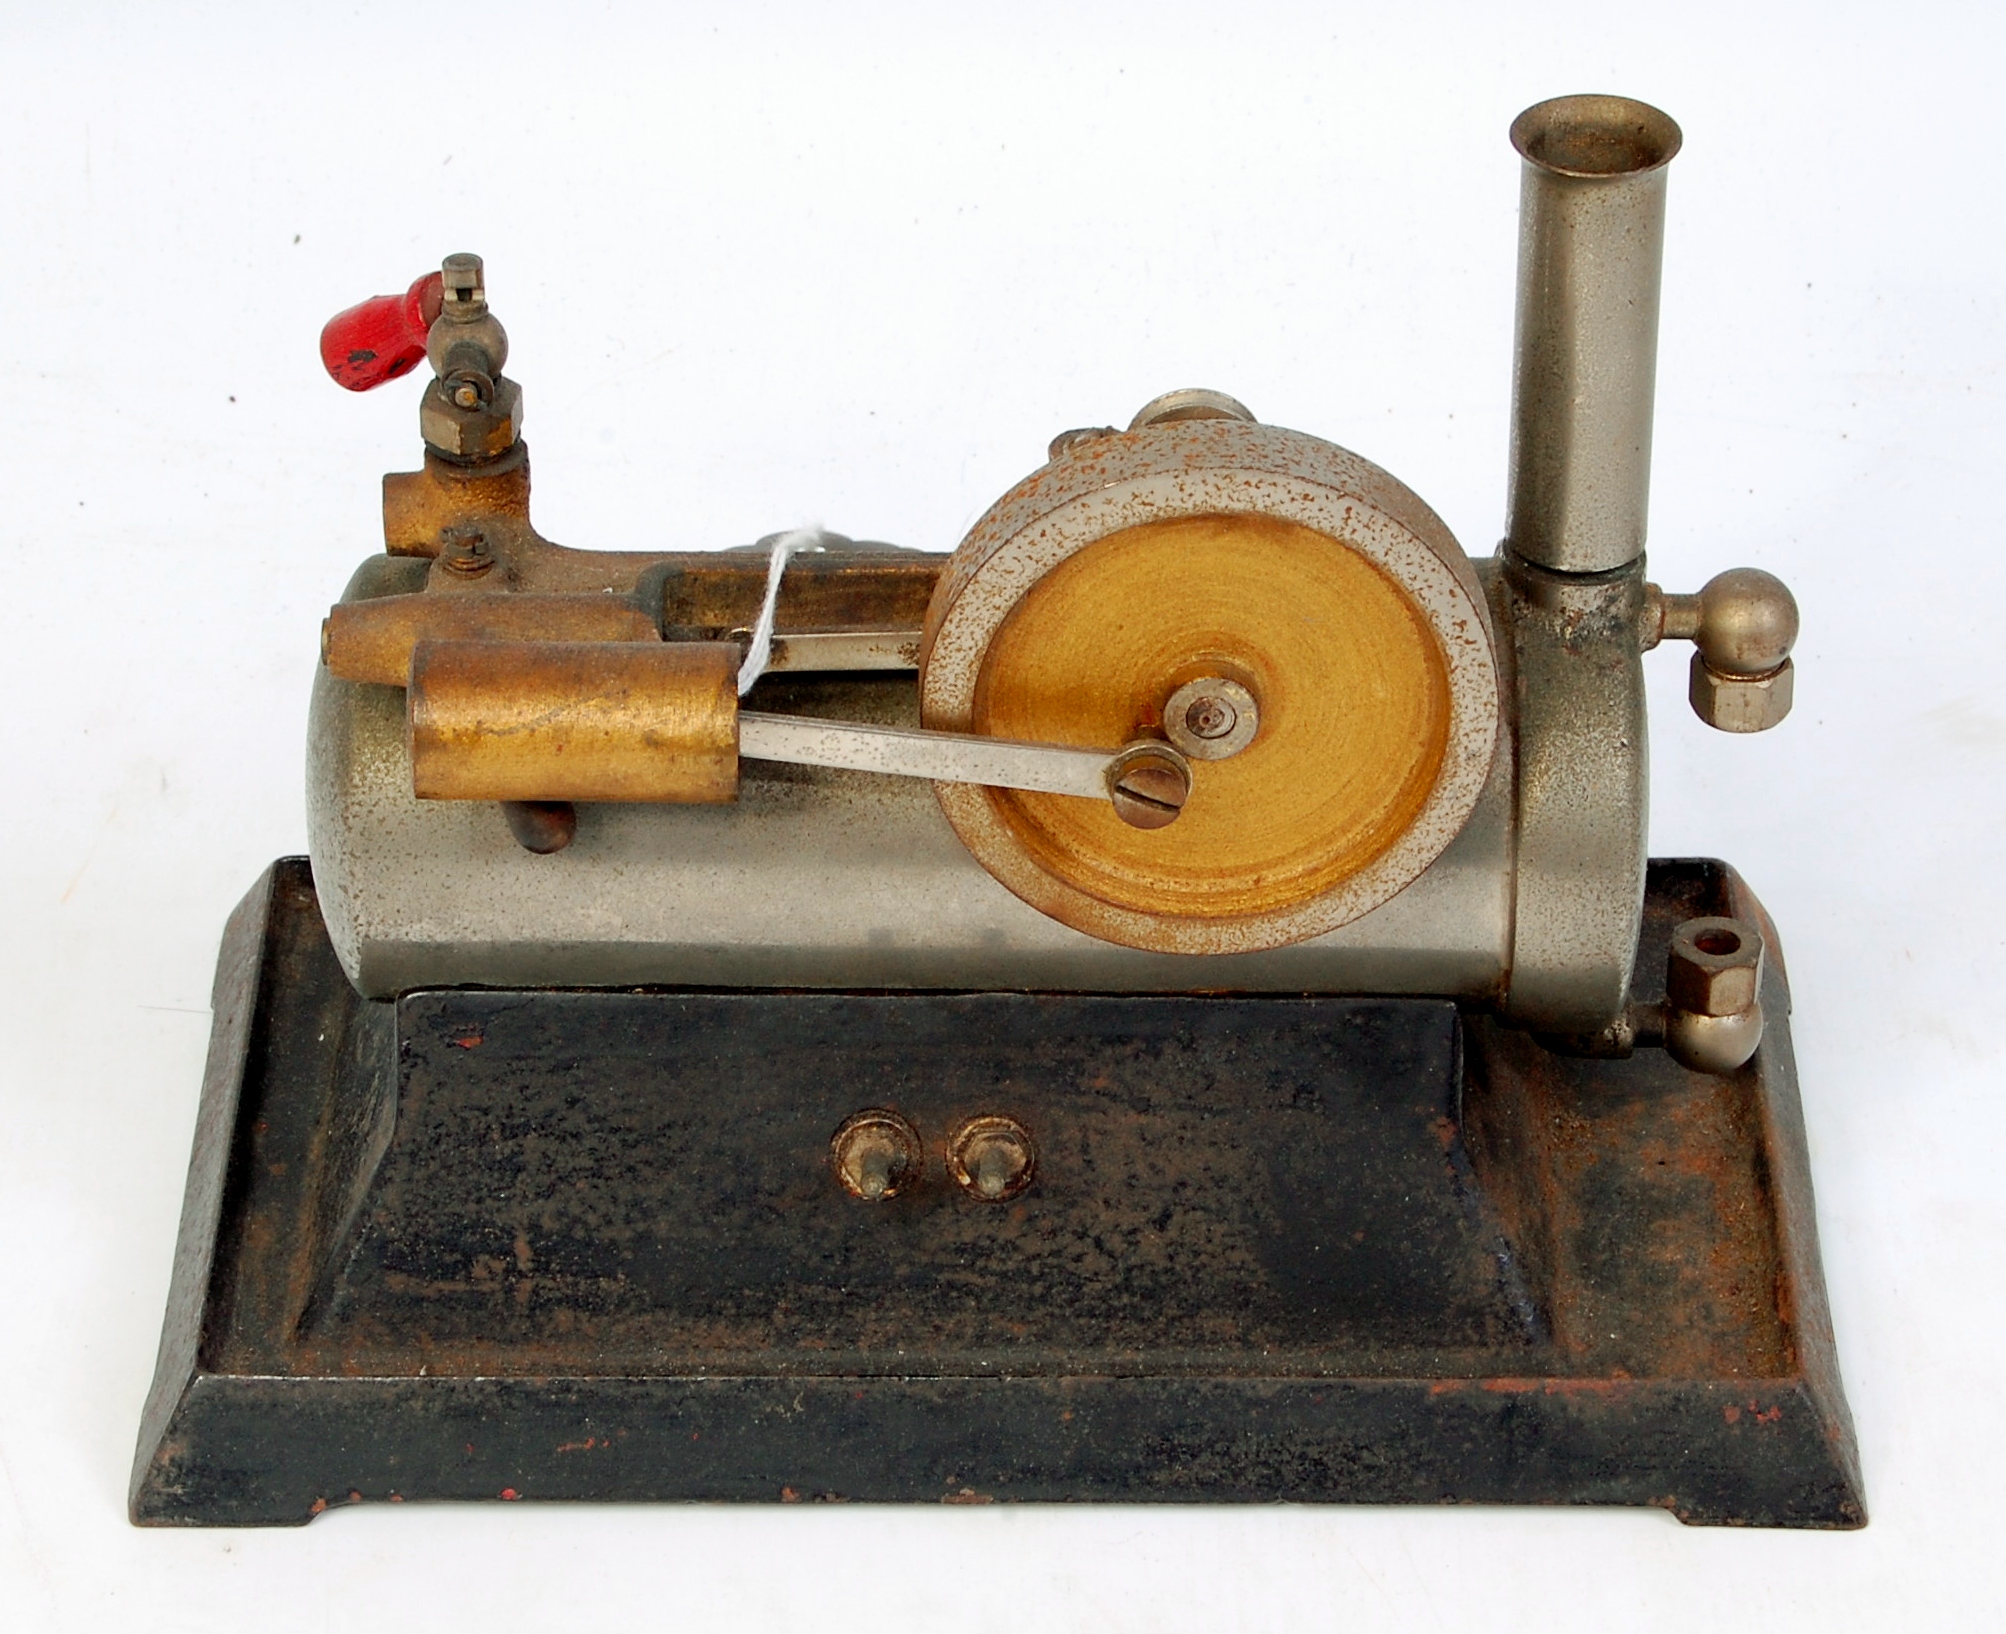 ***WITHDRAWN*** A small horizontal stationary steam engine, un-powered example,